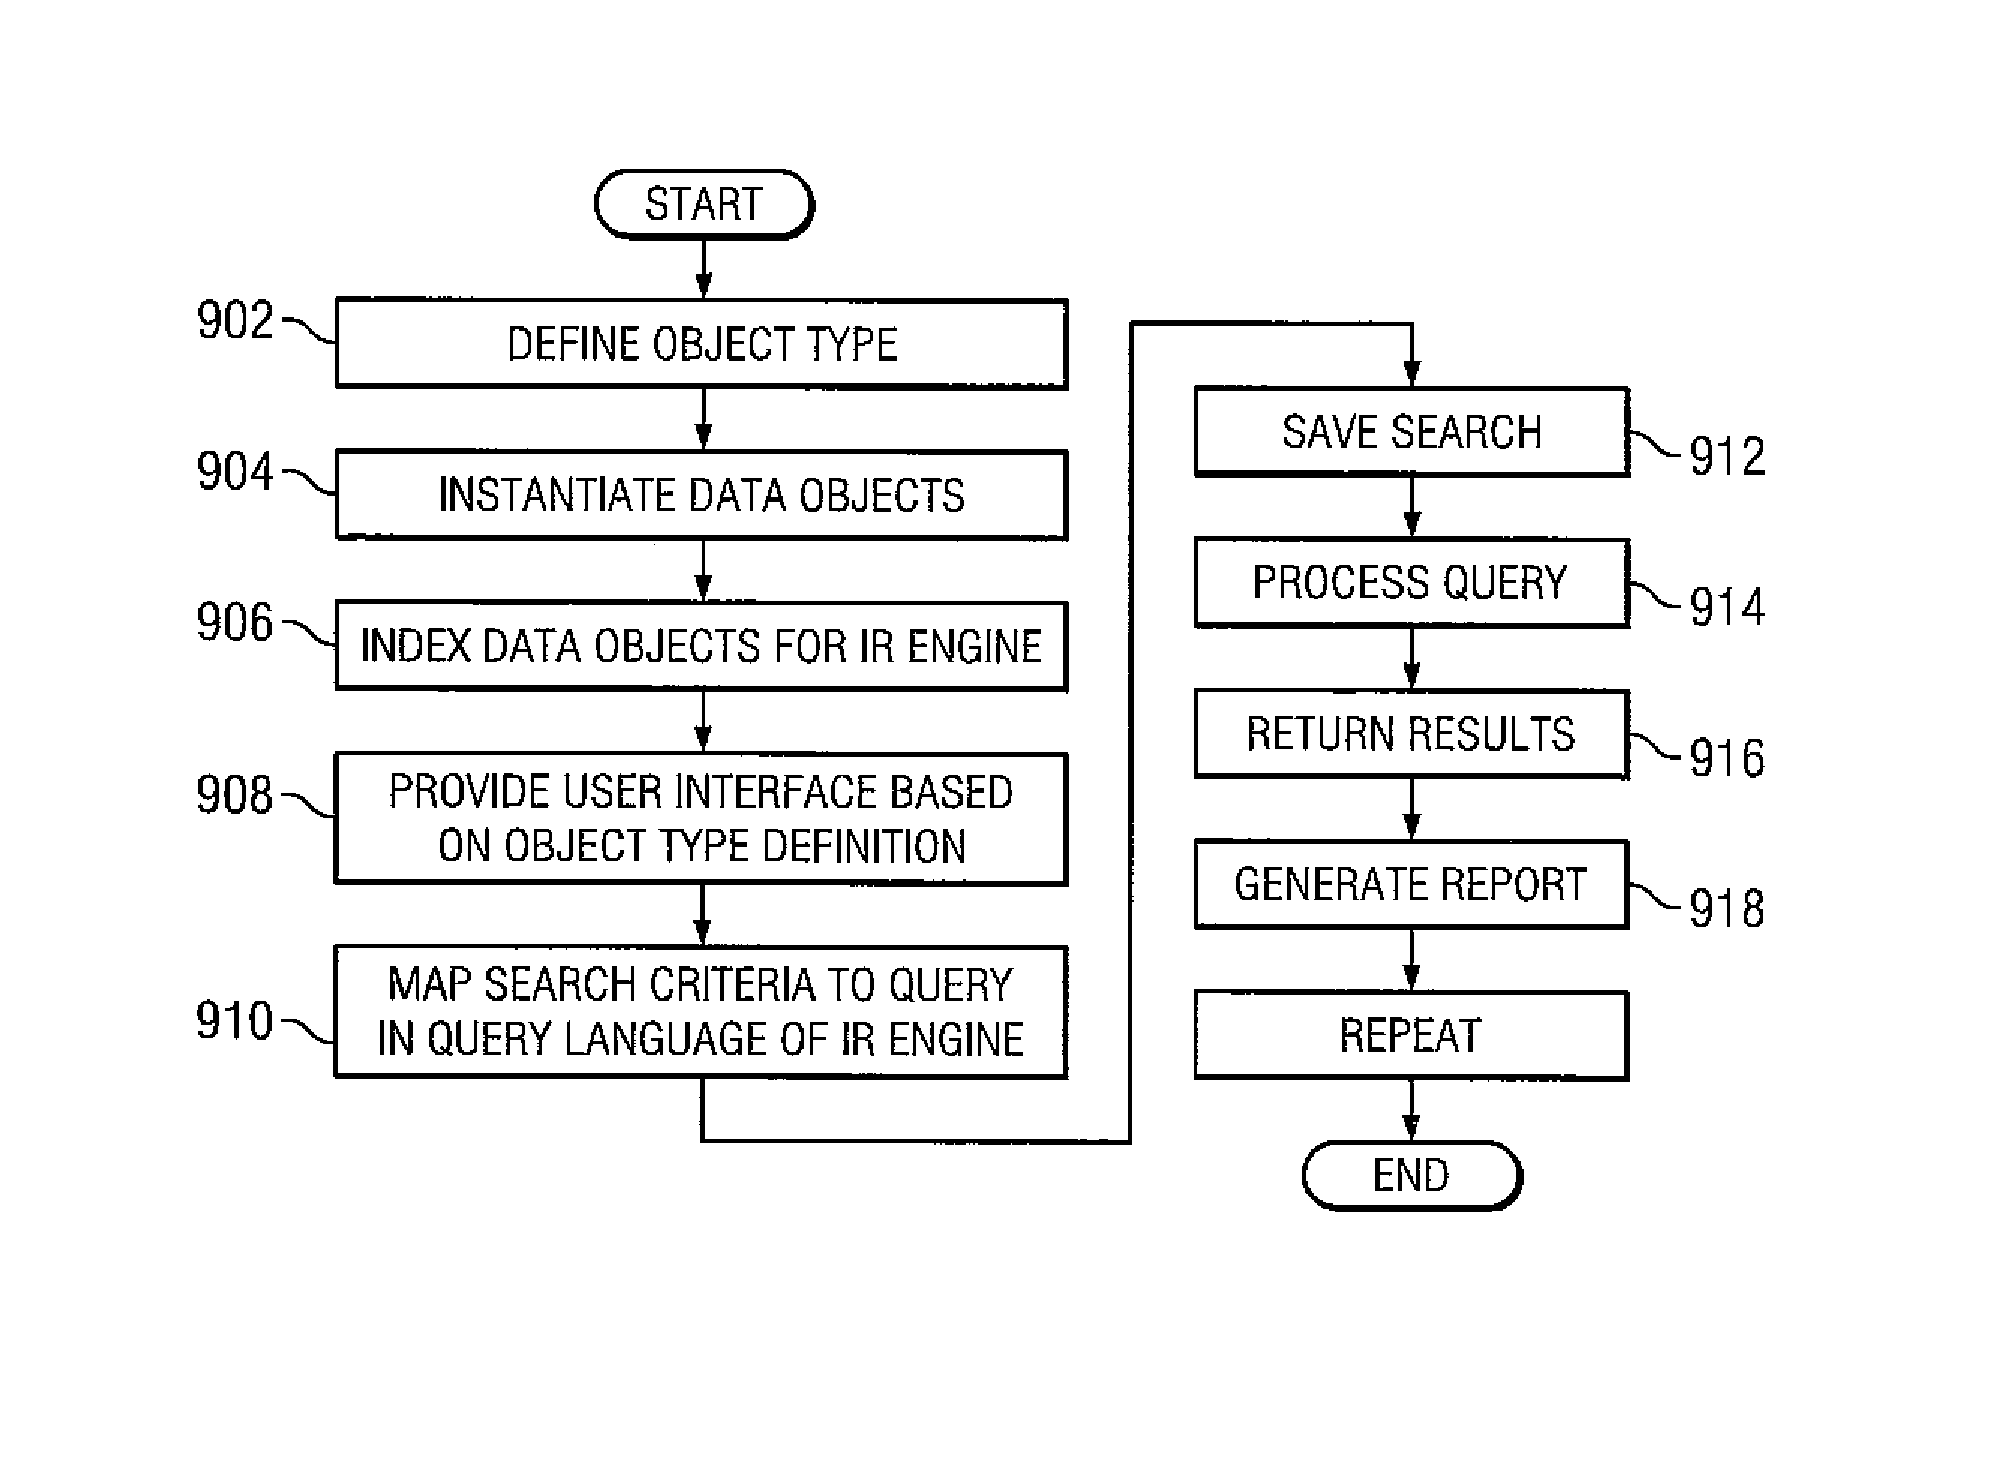 System and method to search and generate reports from semi-structured data